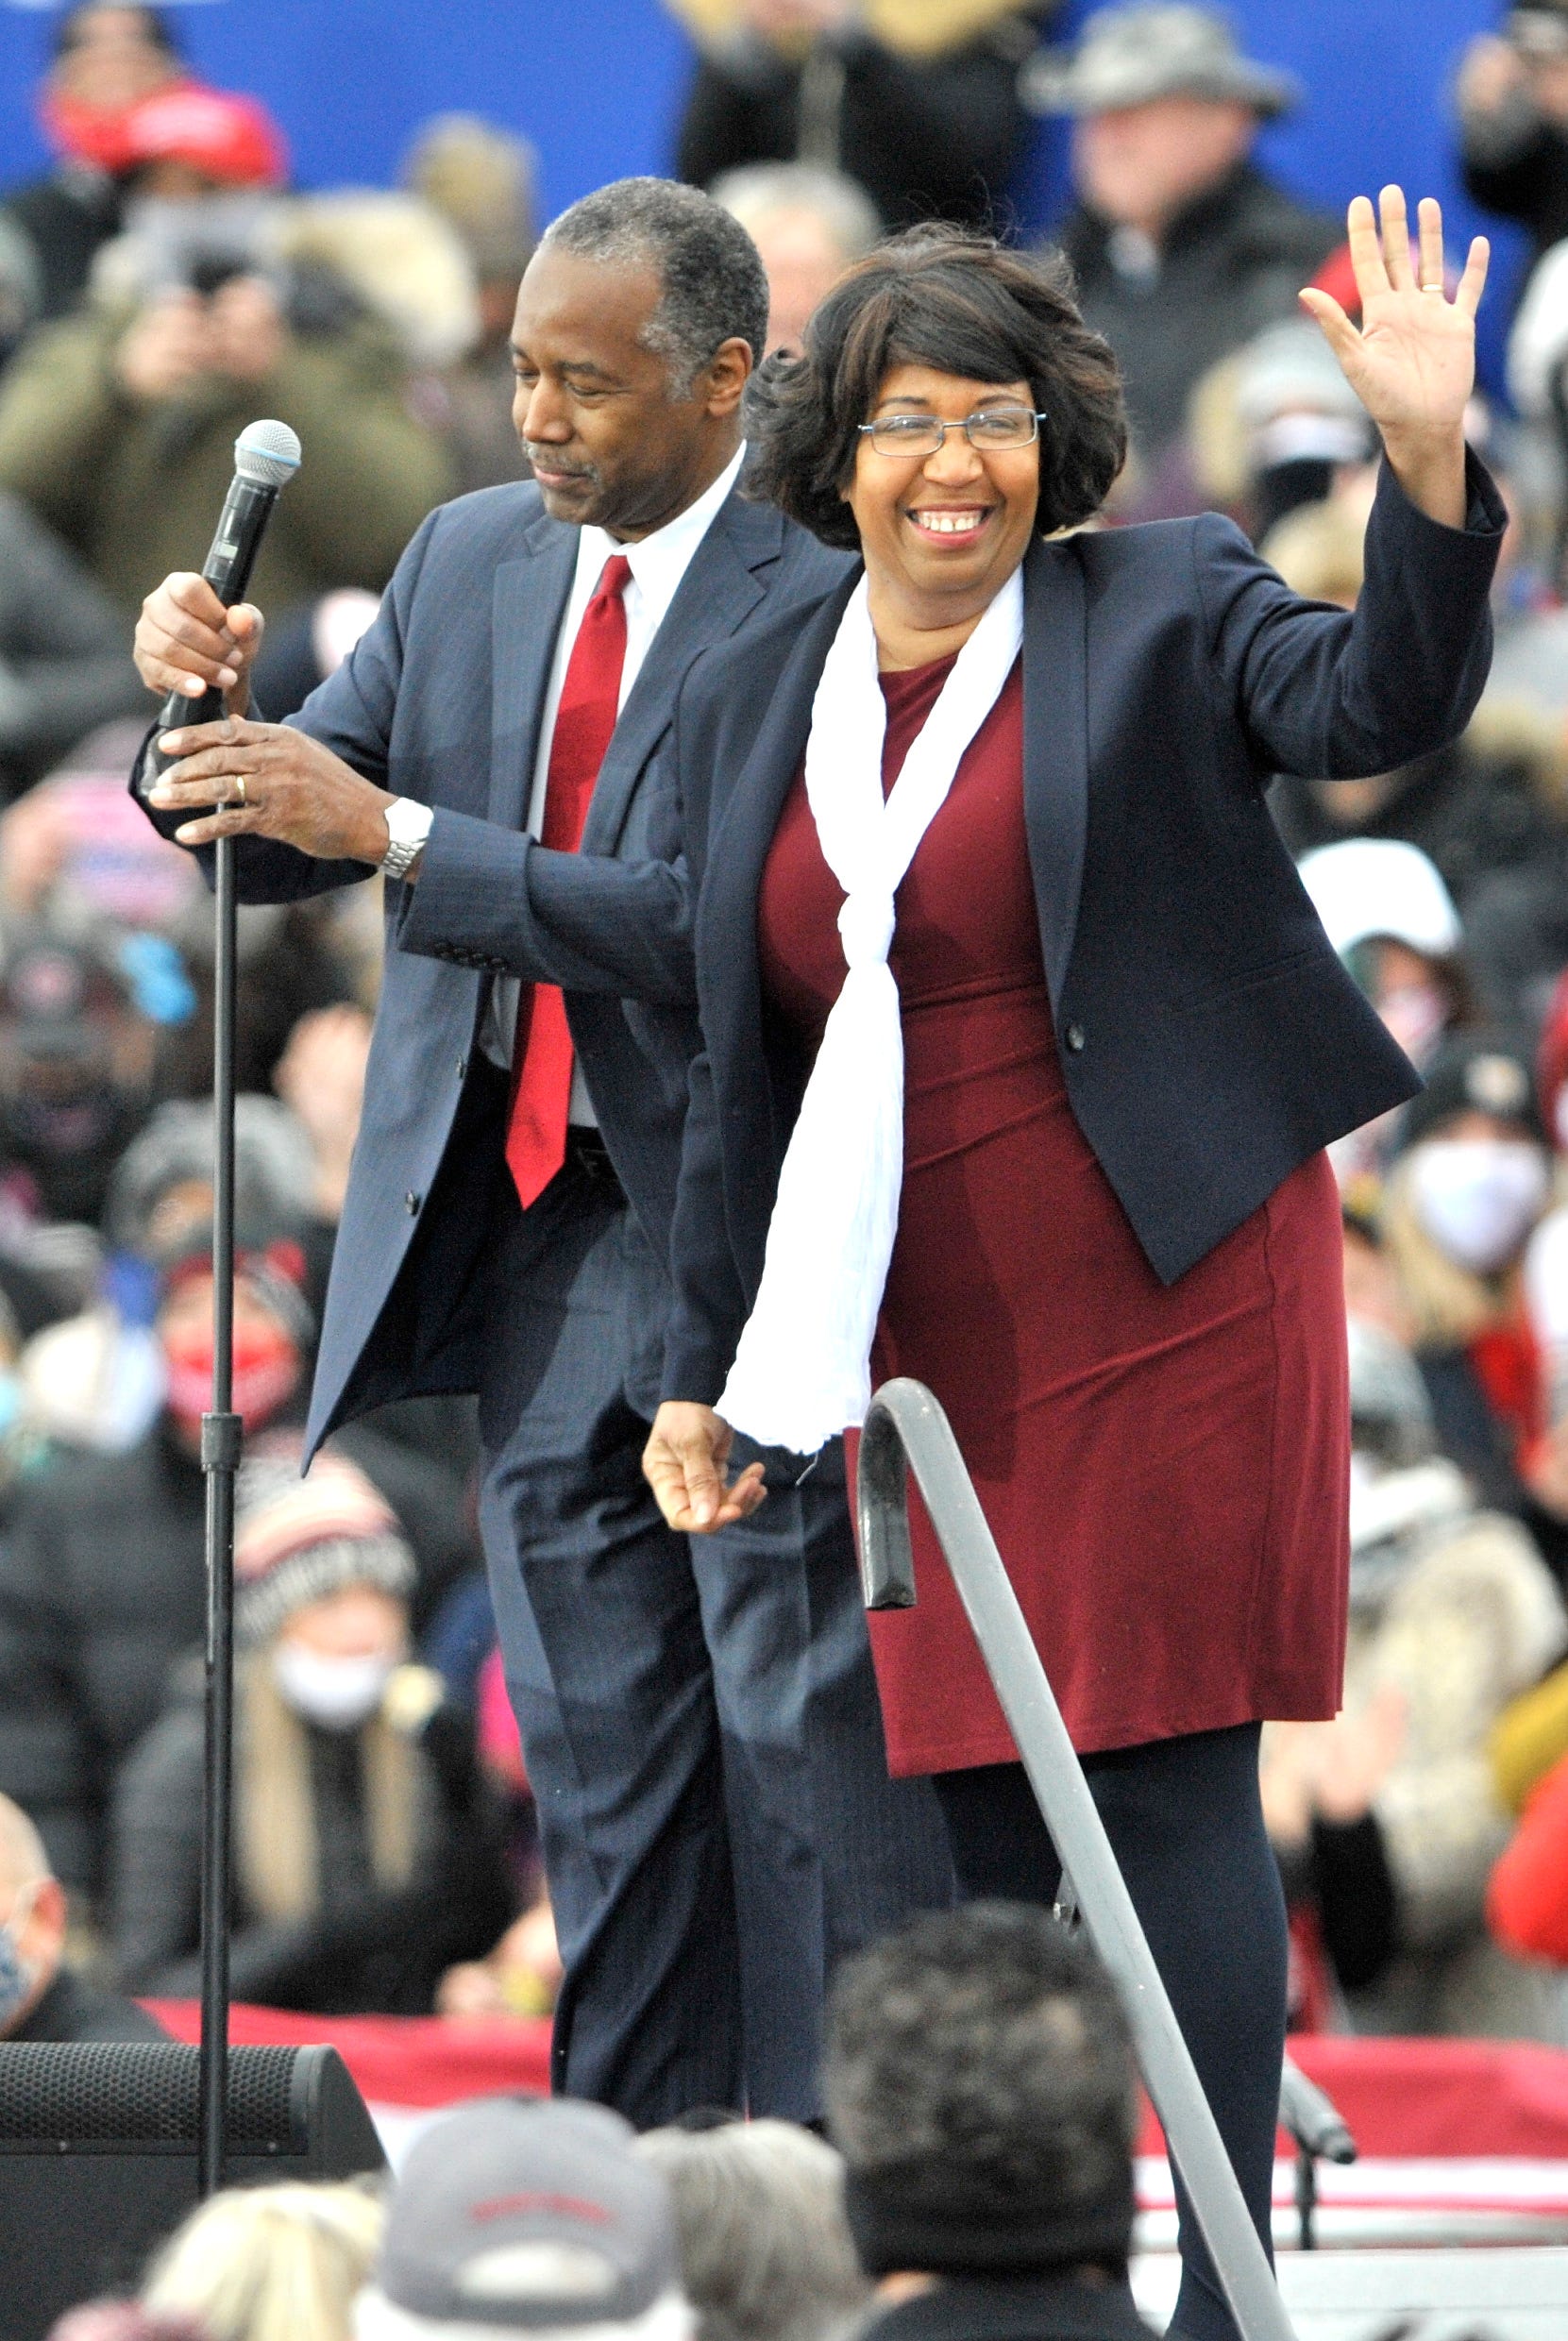 Candy Carson waves on stage with her husband, Ben, before Trump arrives for the rally.